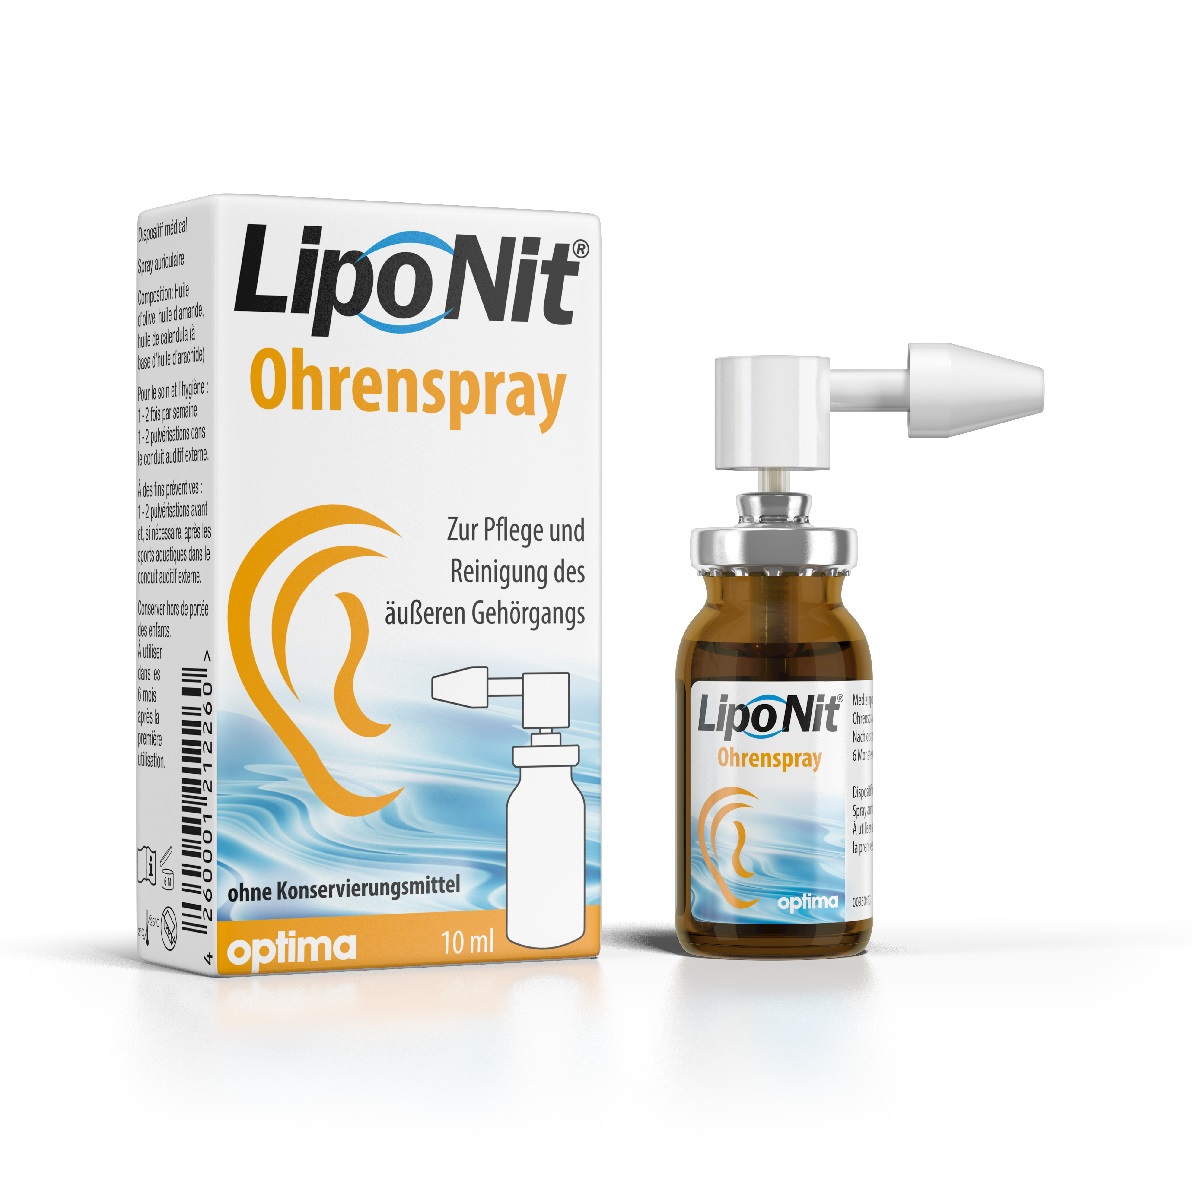 Featured image for “Lipo Nit® Ohrenspray 10 ml”